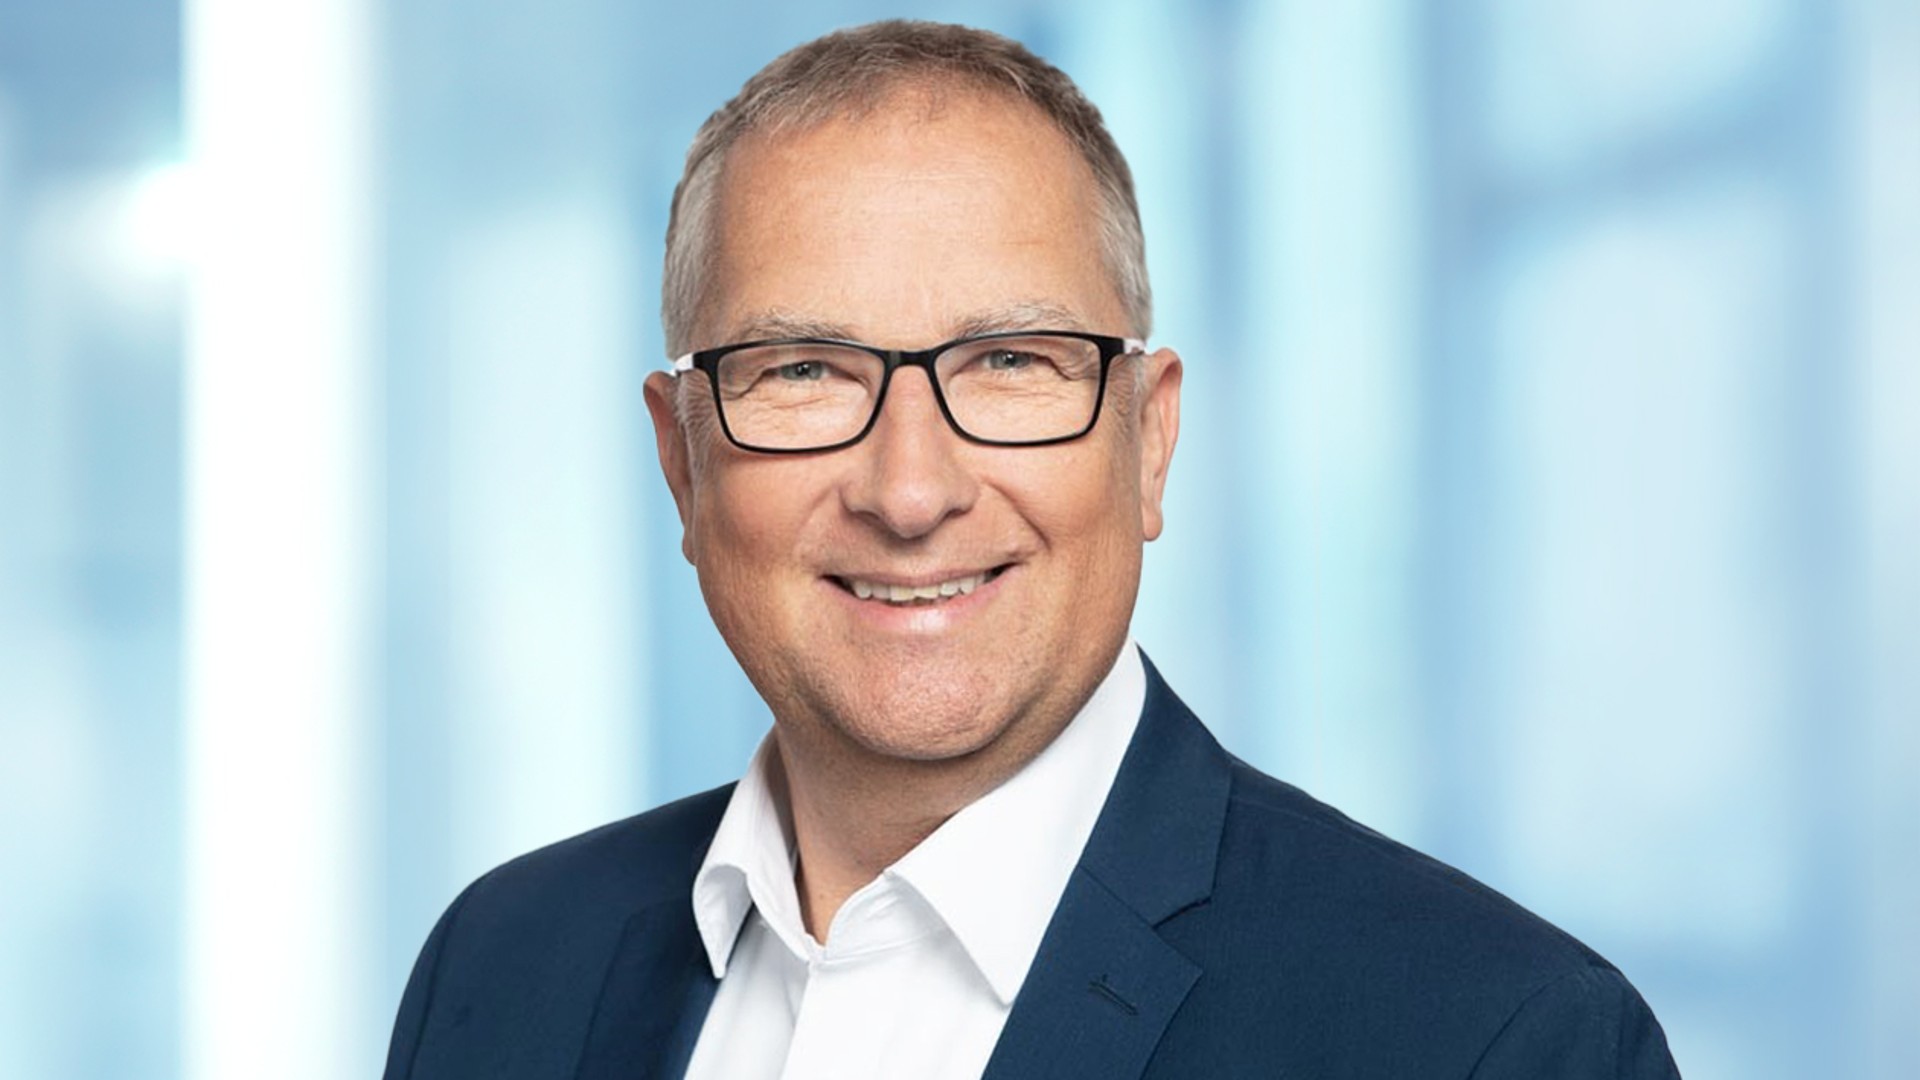 Portrait of Peter Heimbrock, Director Global Technical Sales Steering & Lead Location Düsseldorf at Knorr-Bremse Commercial Vehicle Systems